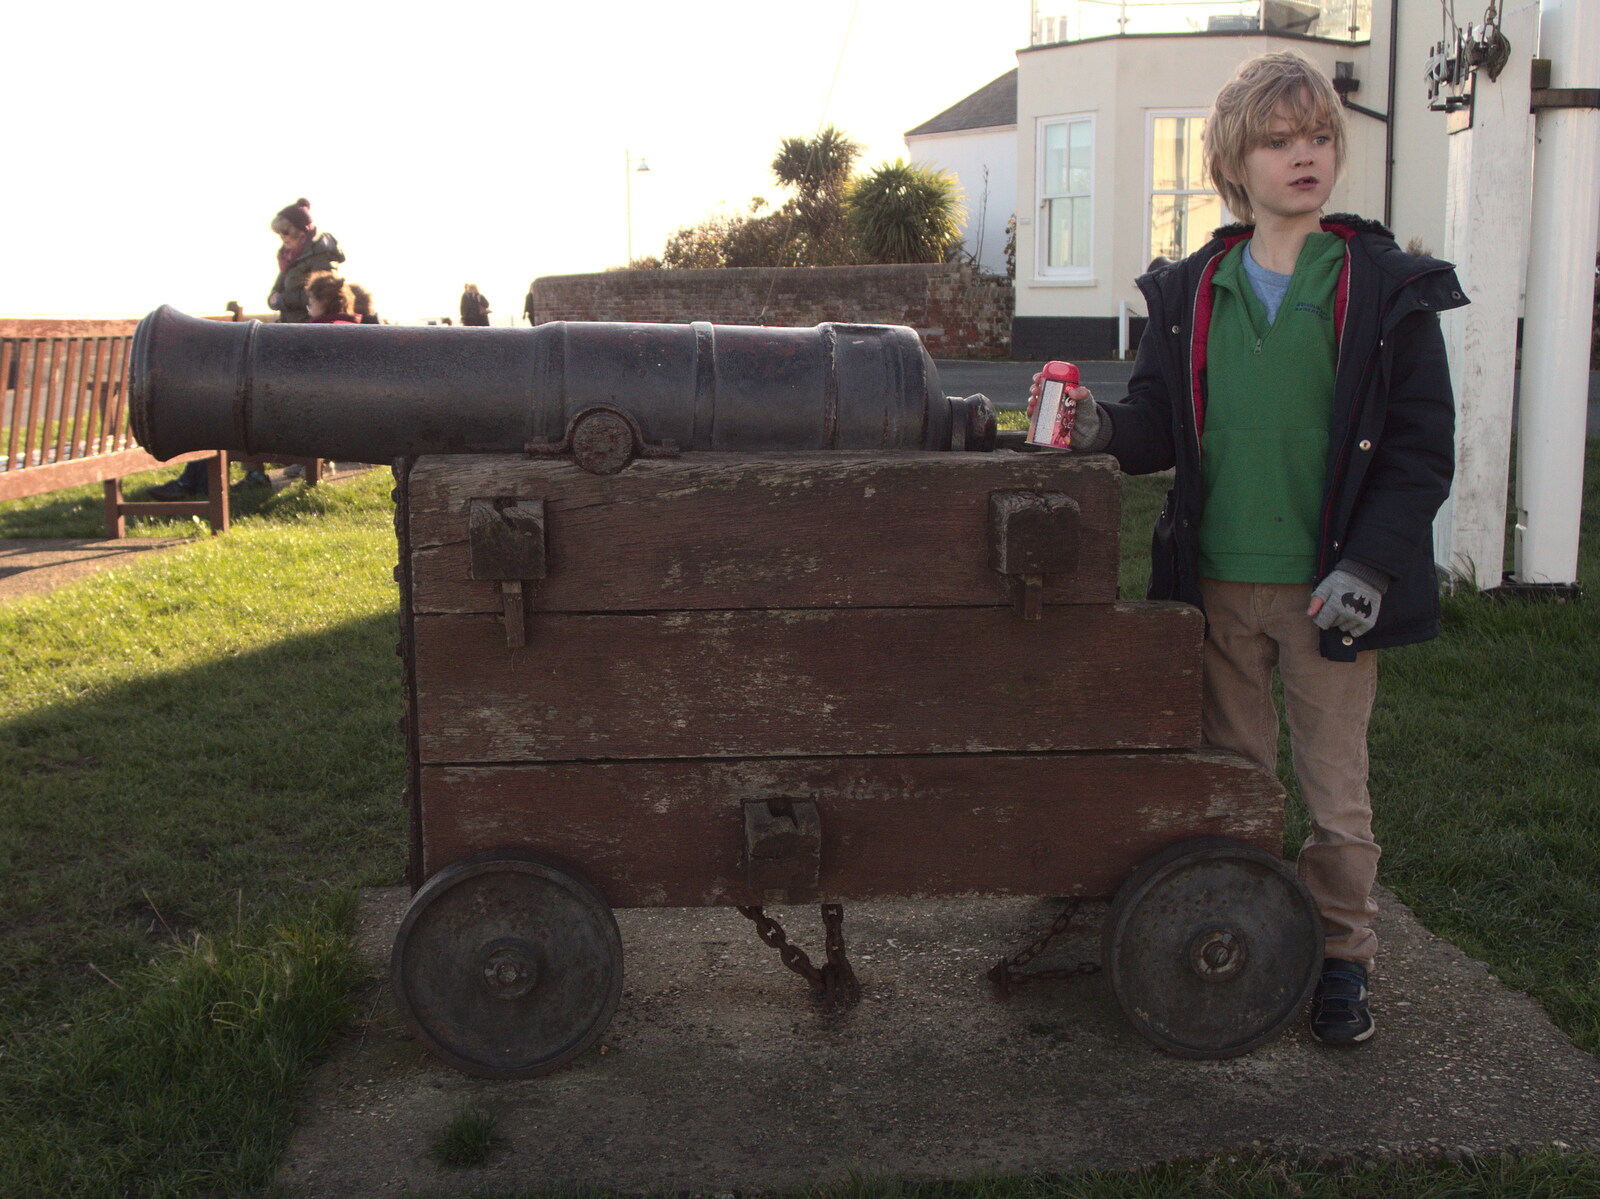 Fred gets a photo of Harry on a cannon from A Trip up a Lighthouse, Southwold, Suffolk - 27th October 2019